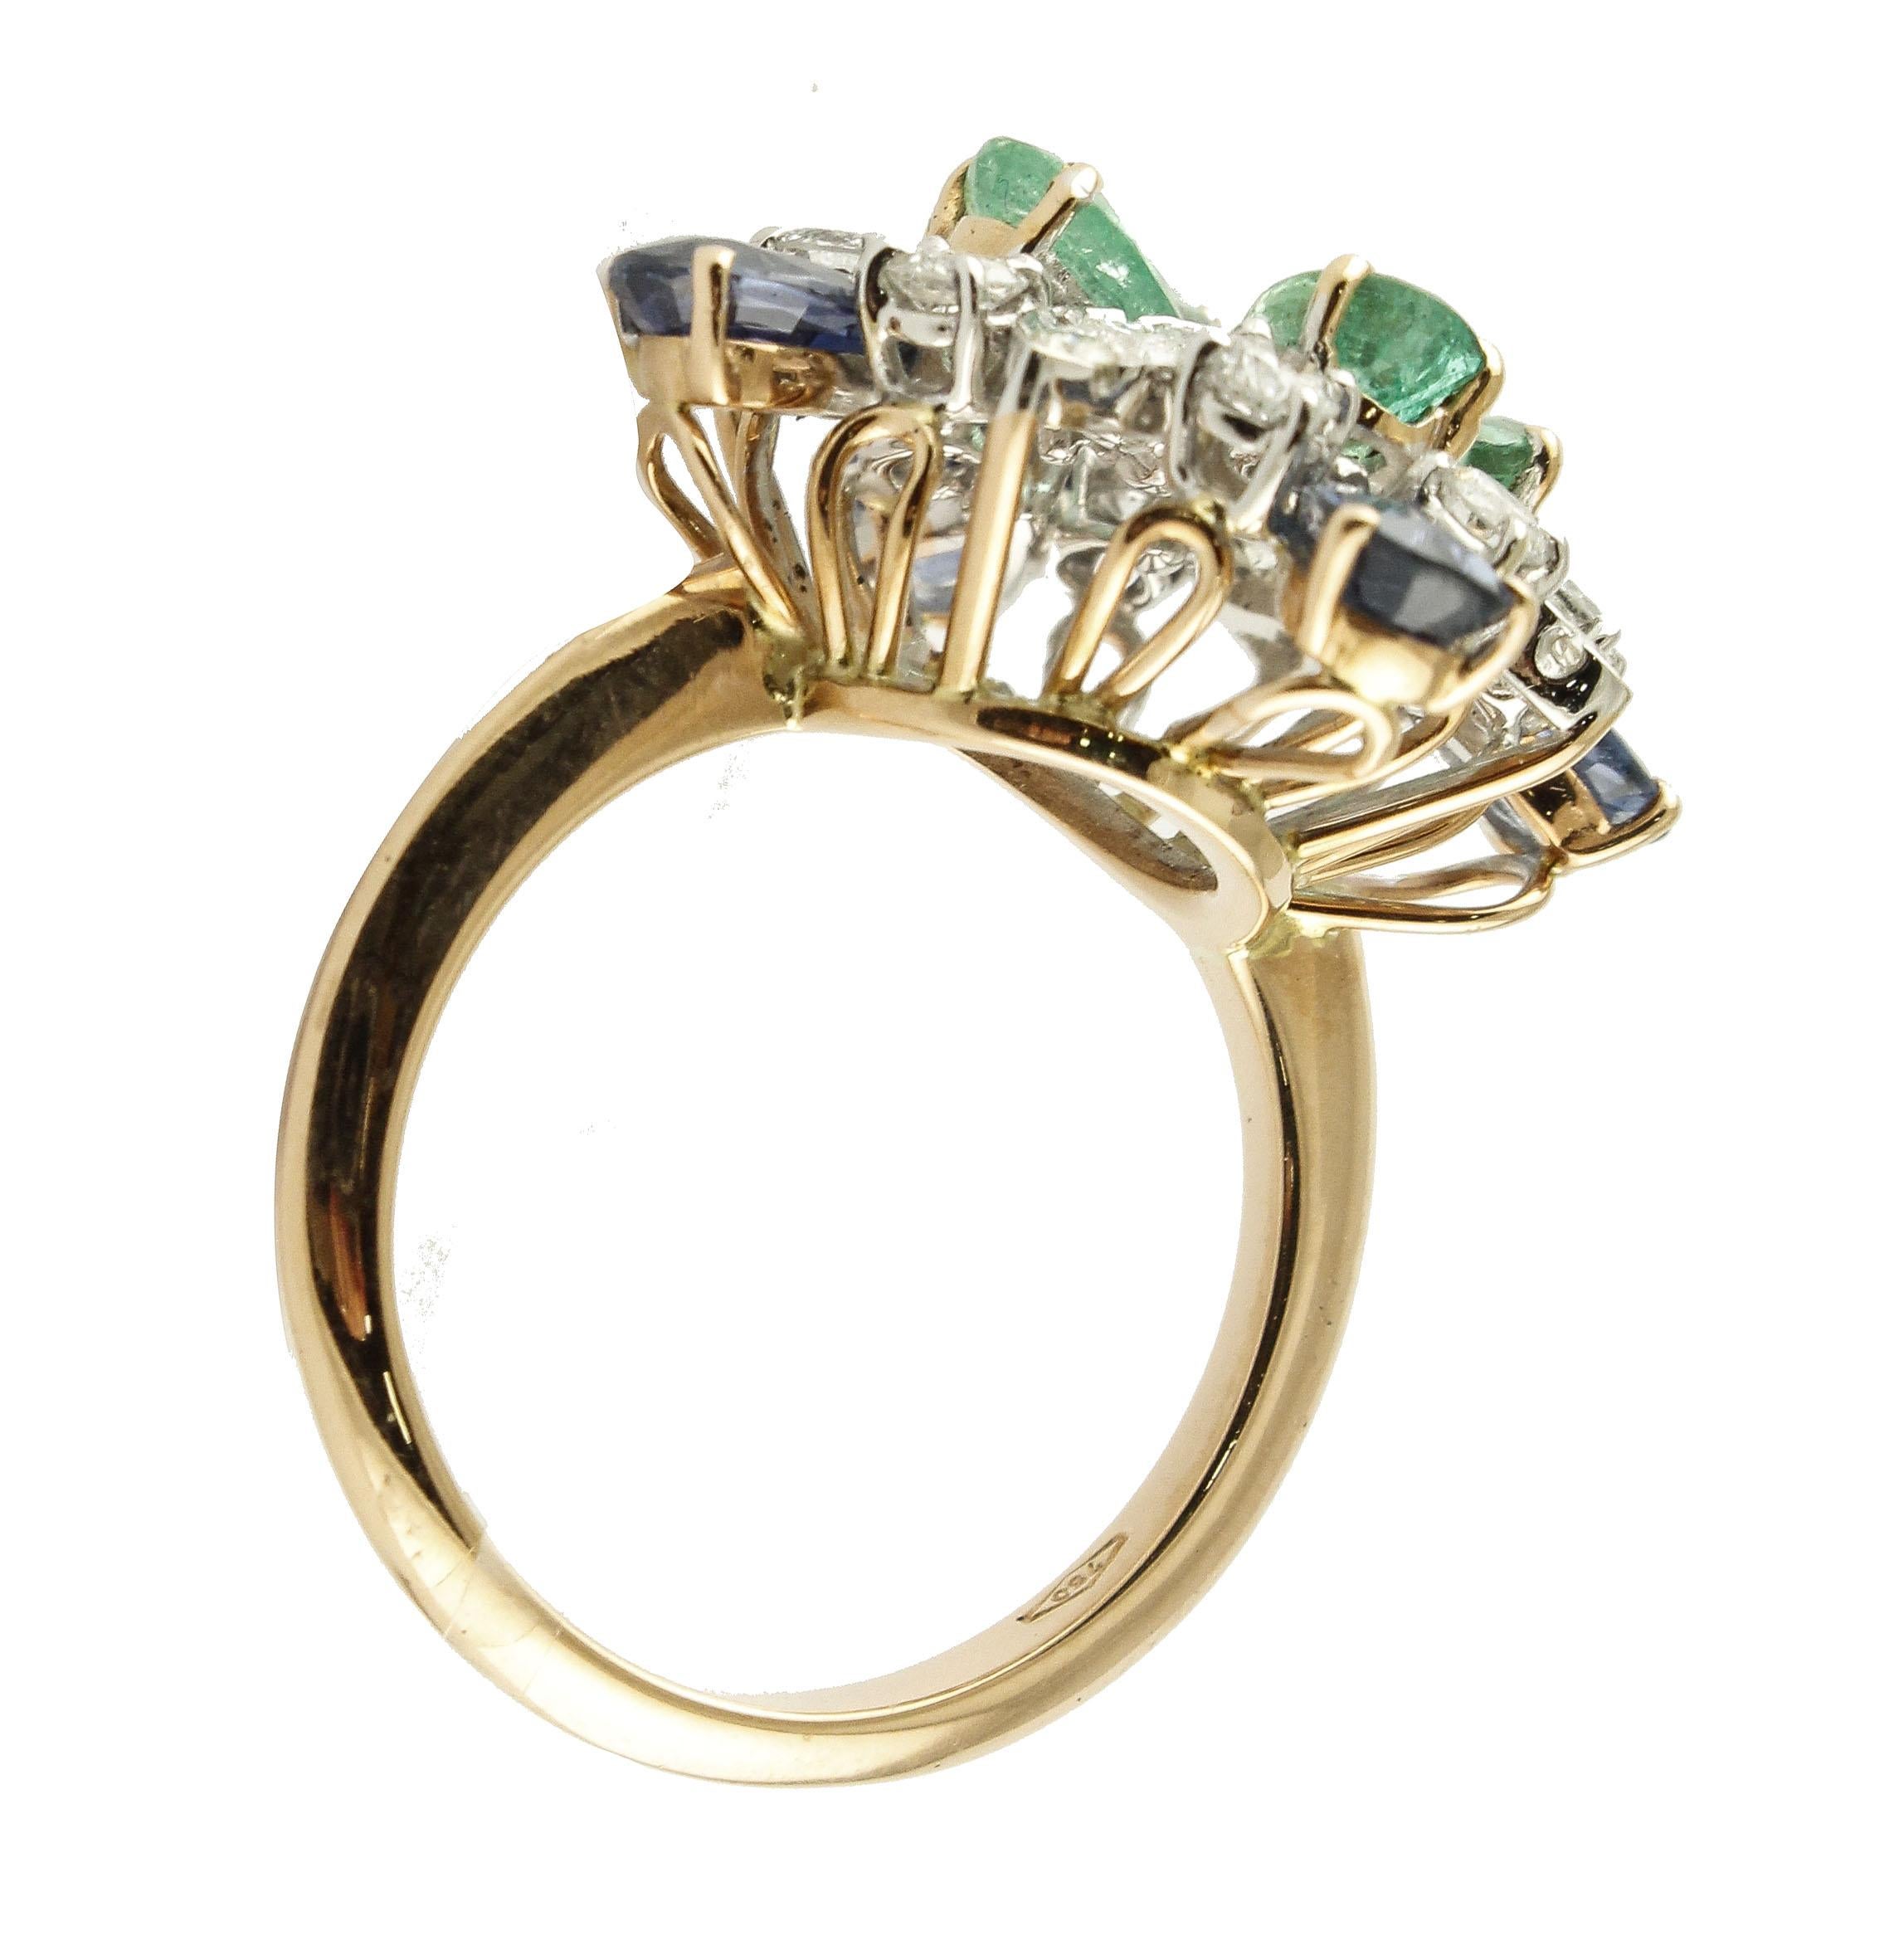 SHIPPING POLICY:
No additional costs will be added to this order.
Shipping costs will be totally covered by the seller (customs duties included).

Charming flower fashion ring in 18 kt rose and white gold,composed of emerald drops that make a flower